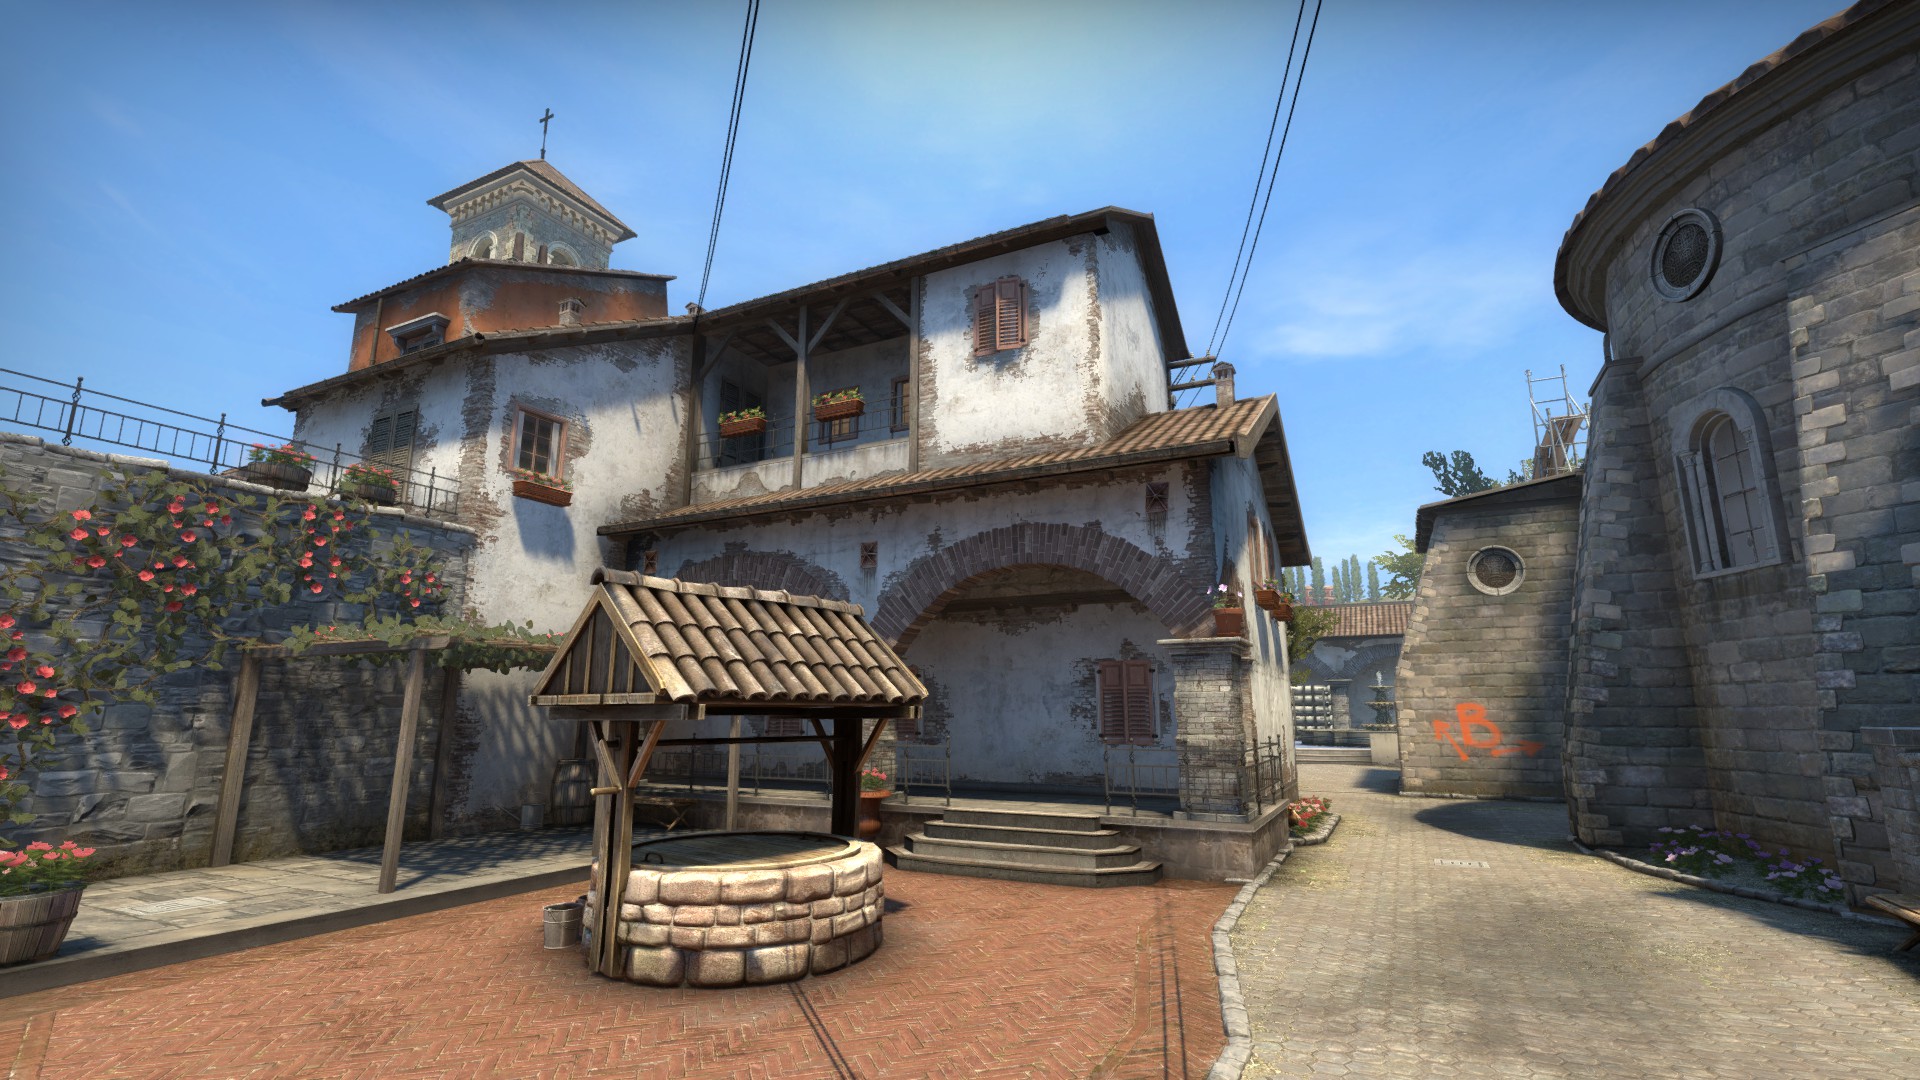 Inferno replaces Dust2 in CS:GO's active map pool | Dot ... - 1920 x 1080 jpeg 473kB